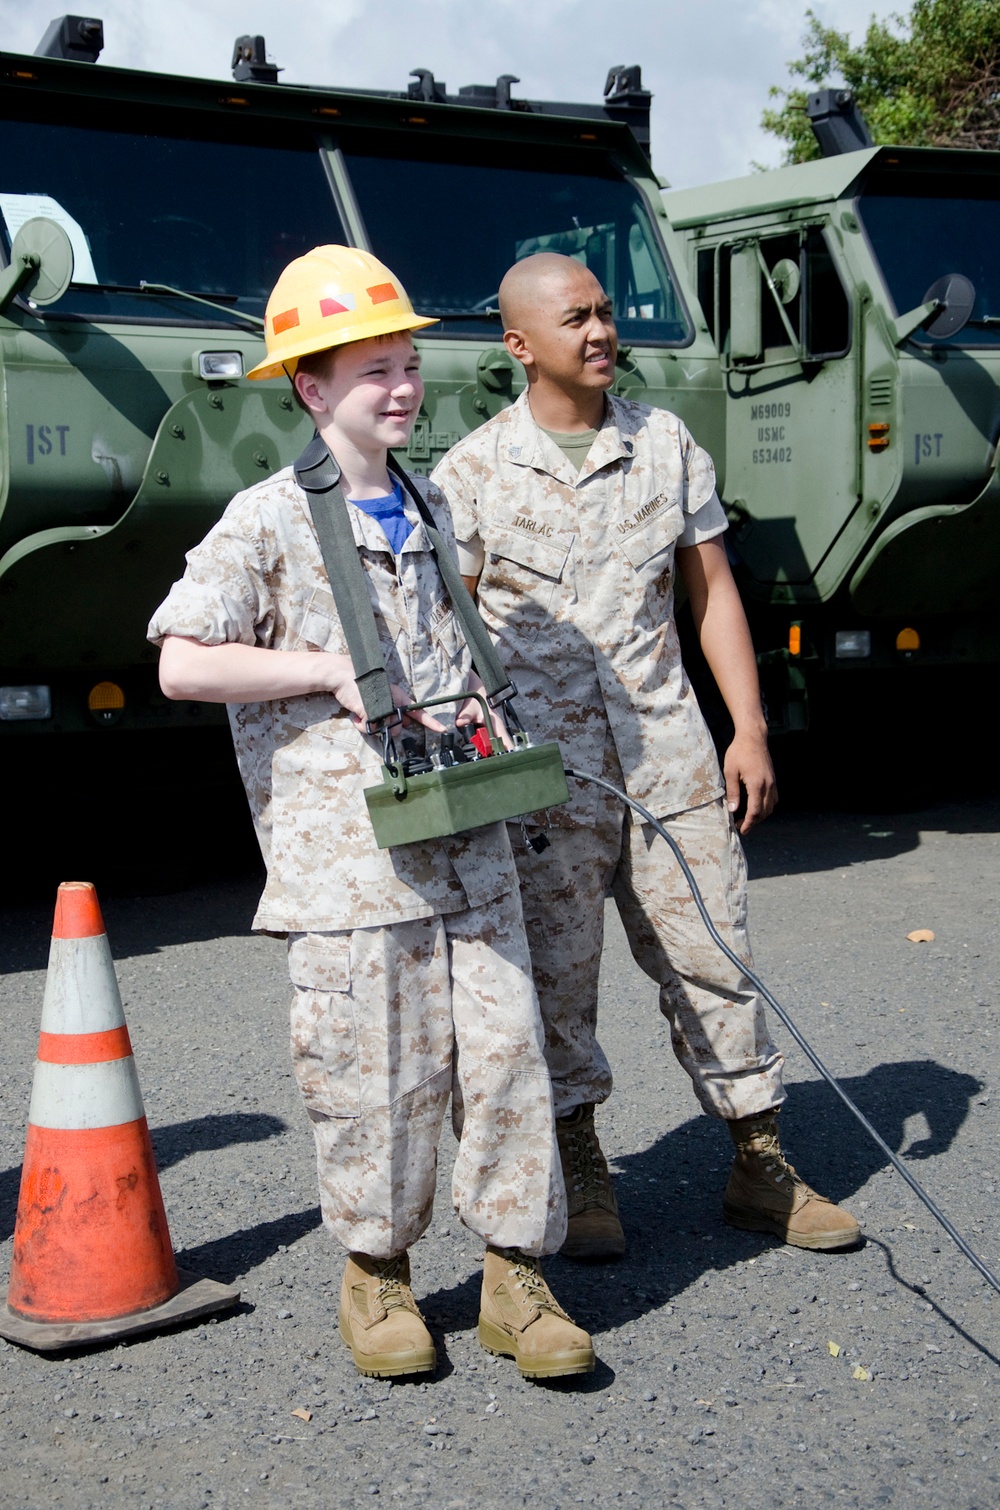 Devil Dog for a day: CLB-3, Make-A-Wish make dream extra special